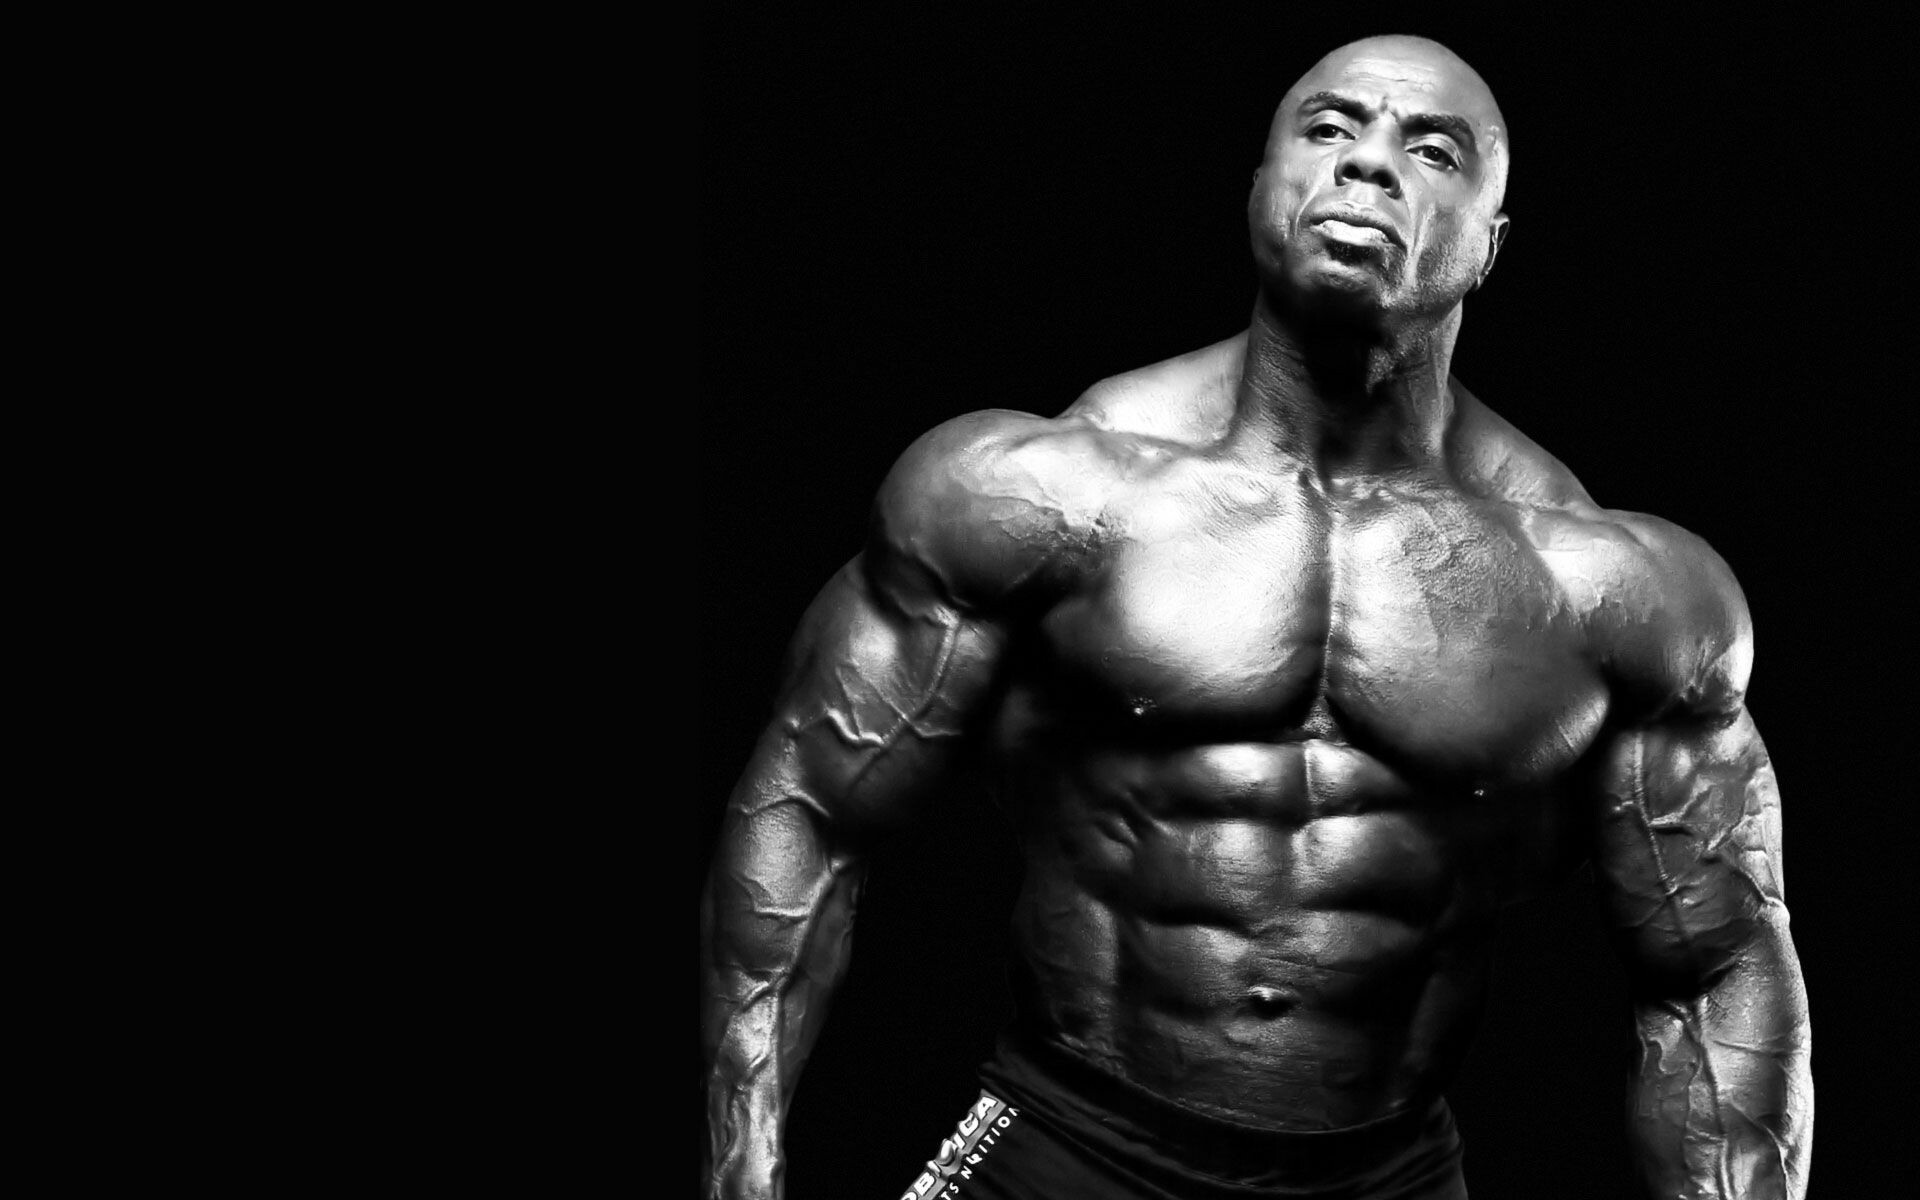 32+ Bodybuilders HD Wallpapers: HD, 4K, 5K for PC and Mobile | Download  free images for iPhone, Android